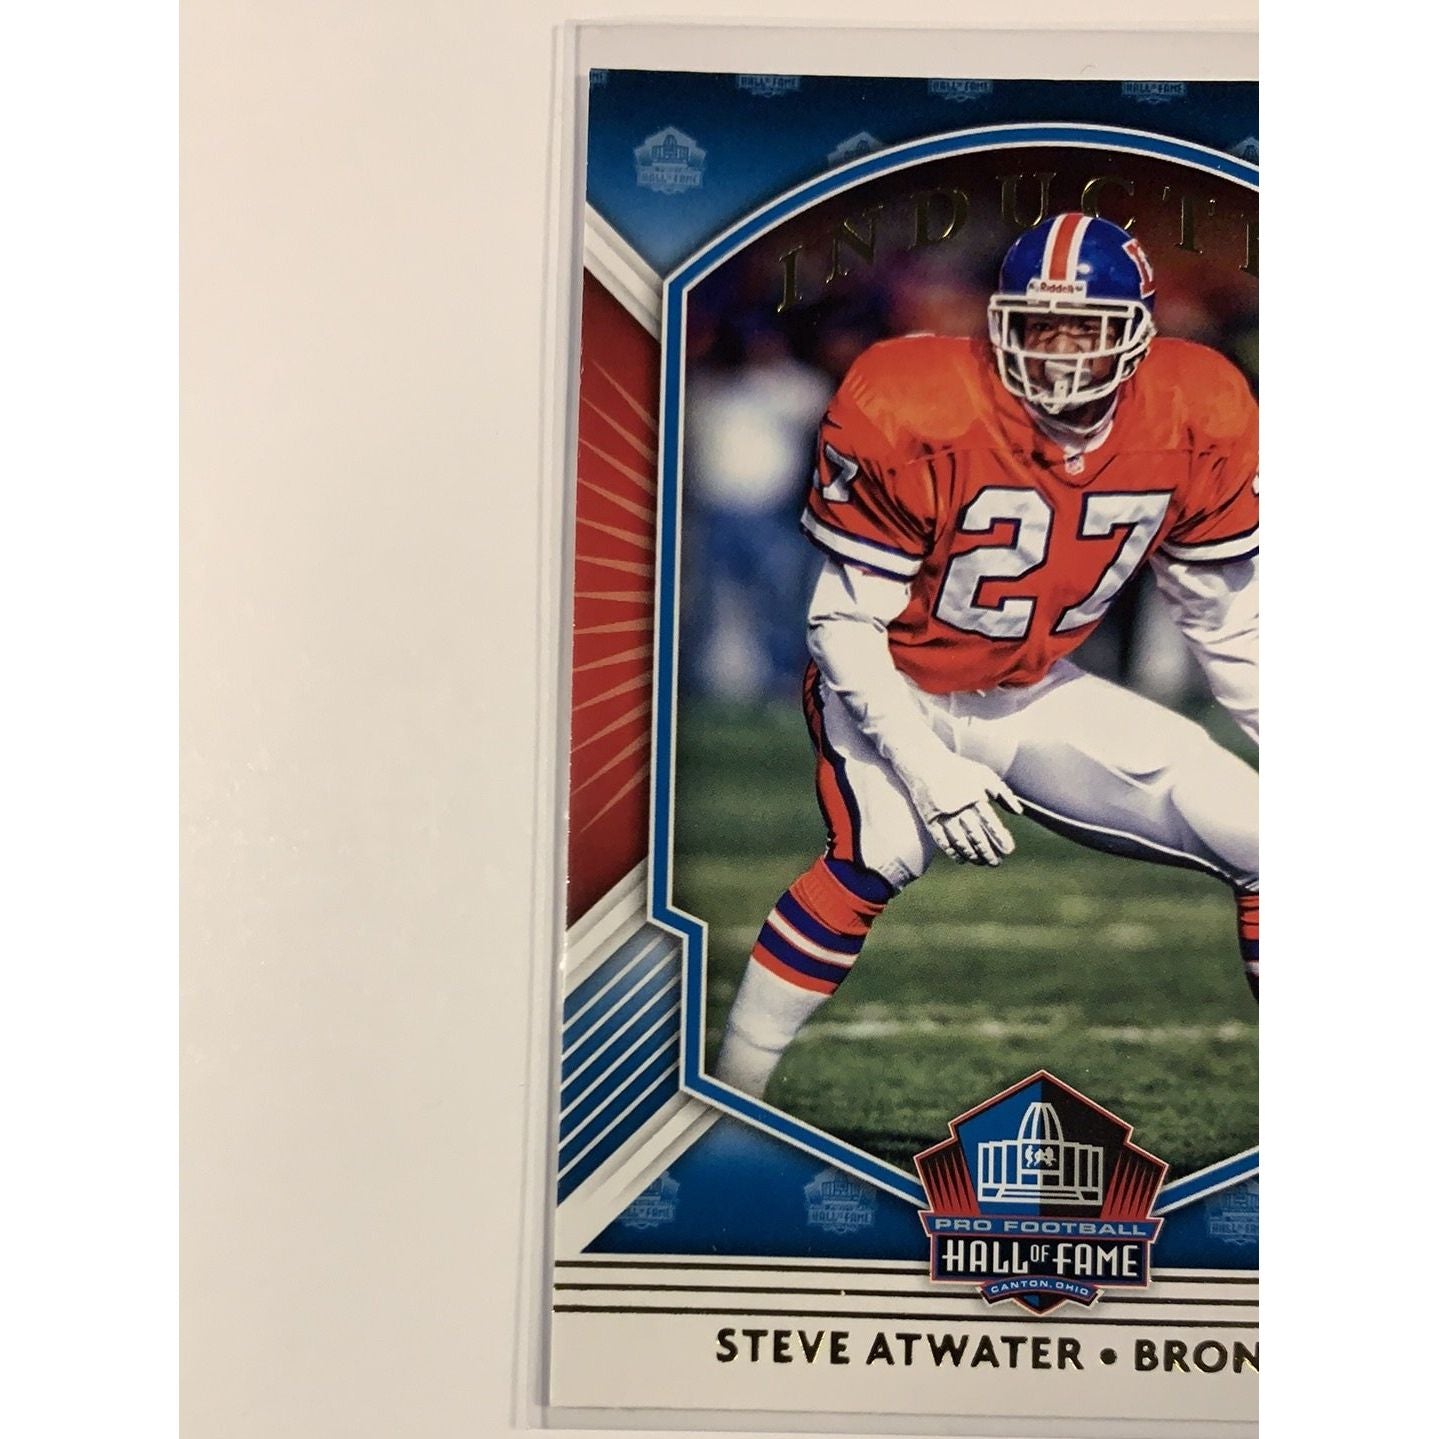  2020 Donruss Steve Atwater Inducted  Local Legends Cards & Collectibles